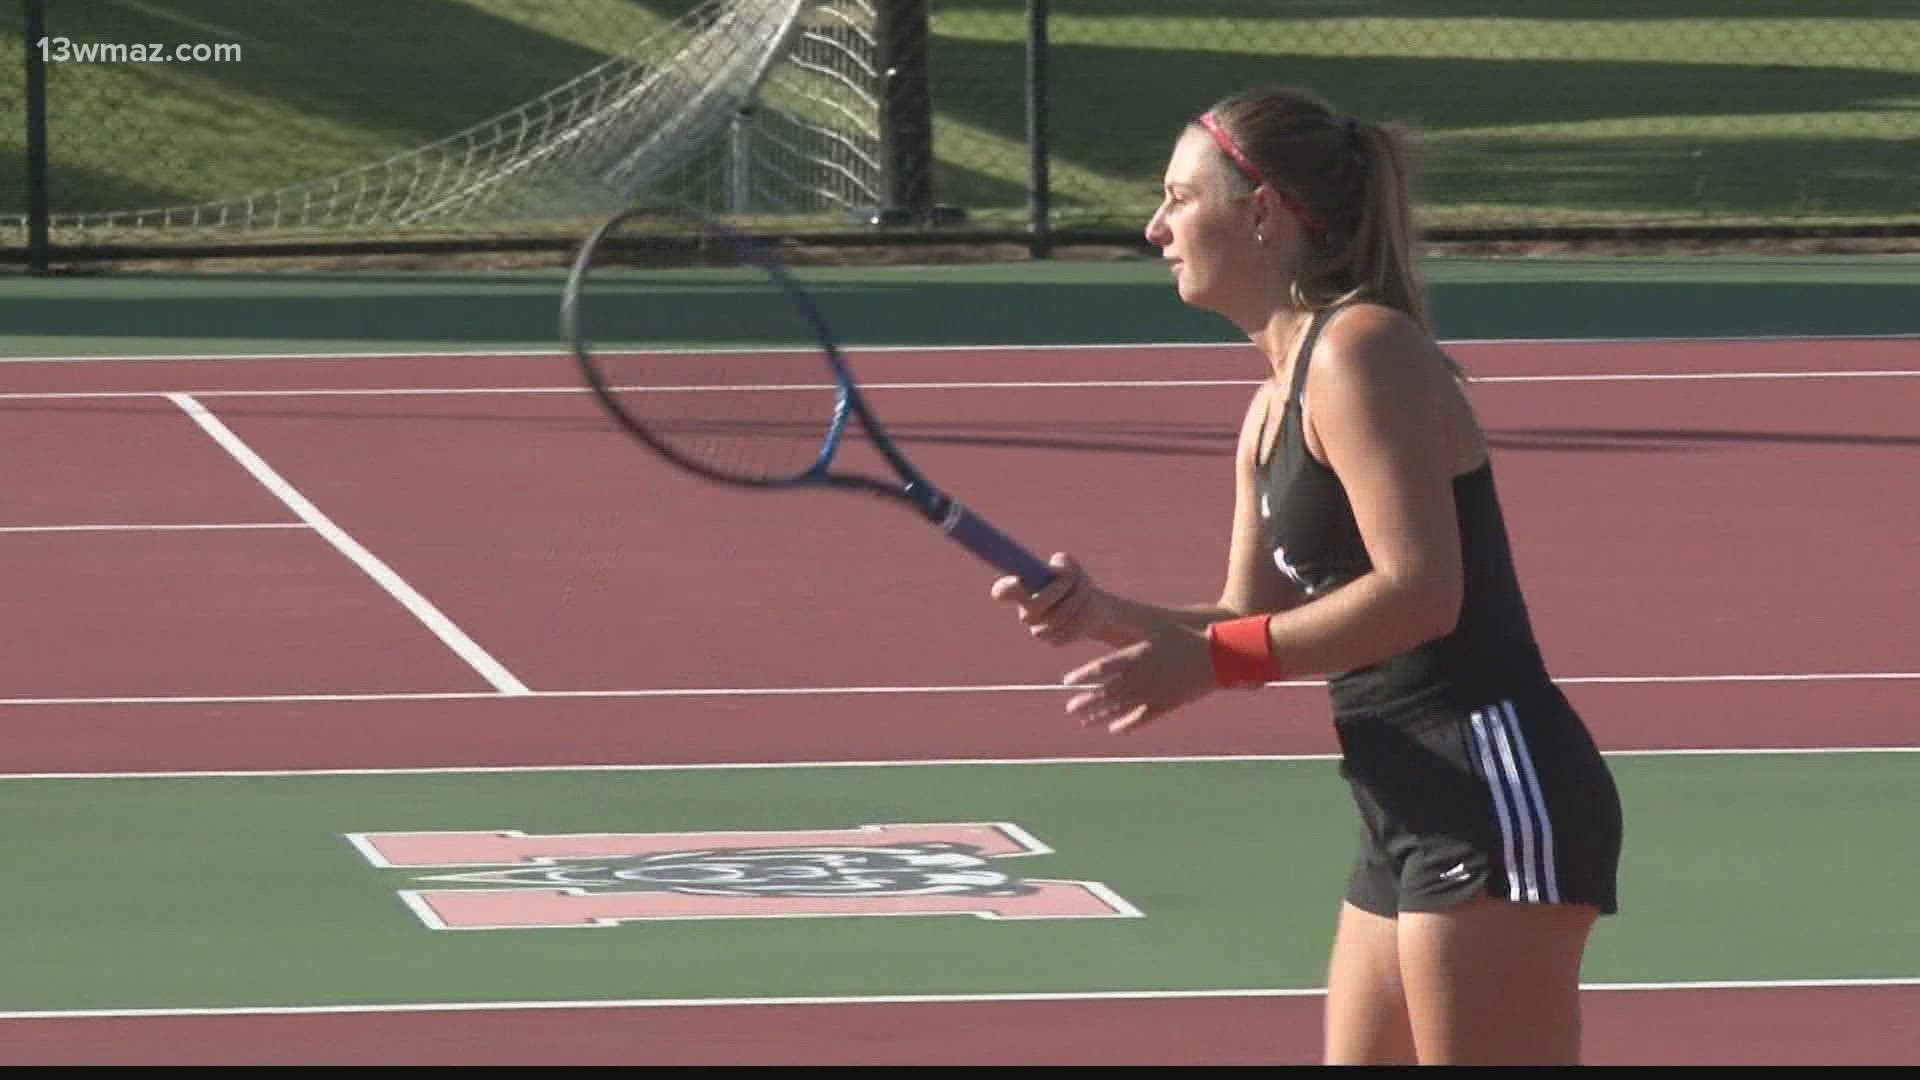 Mercer junior Mary Courville and assistant coach Andrea Garcia were given a wild card into the doubles main draw.